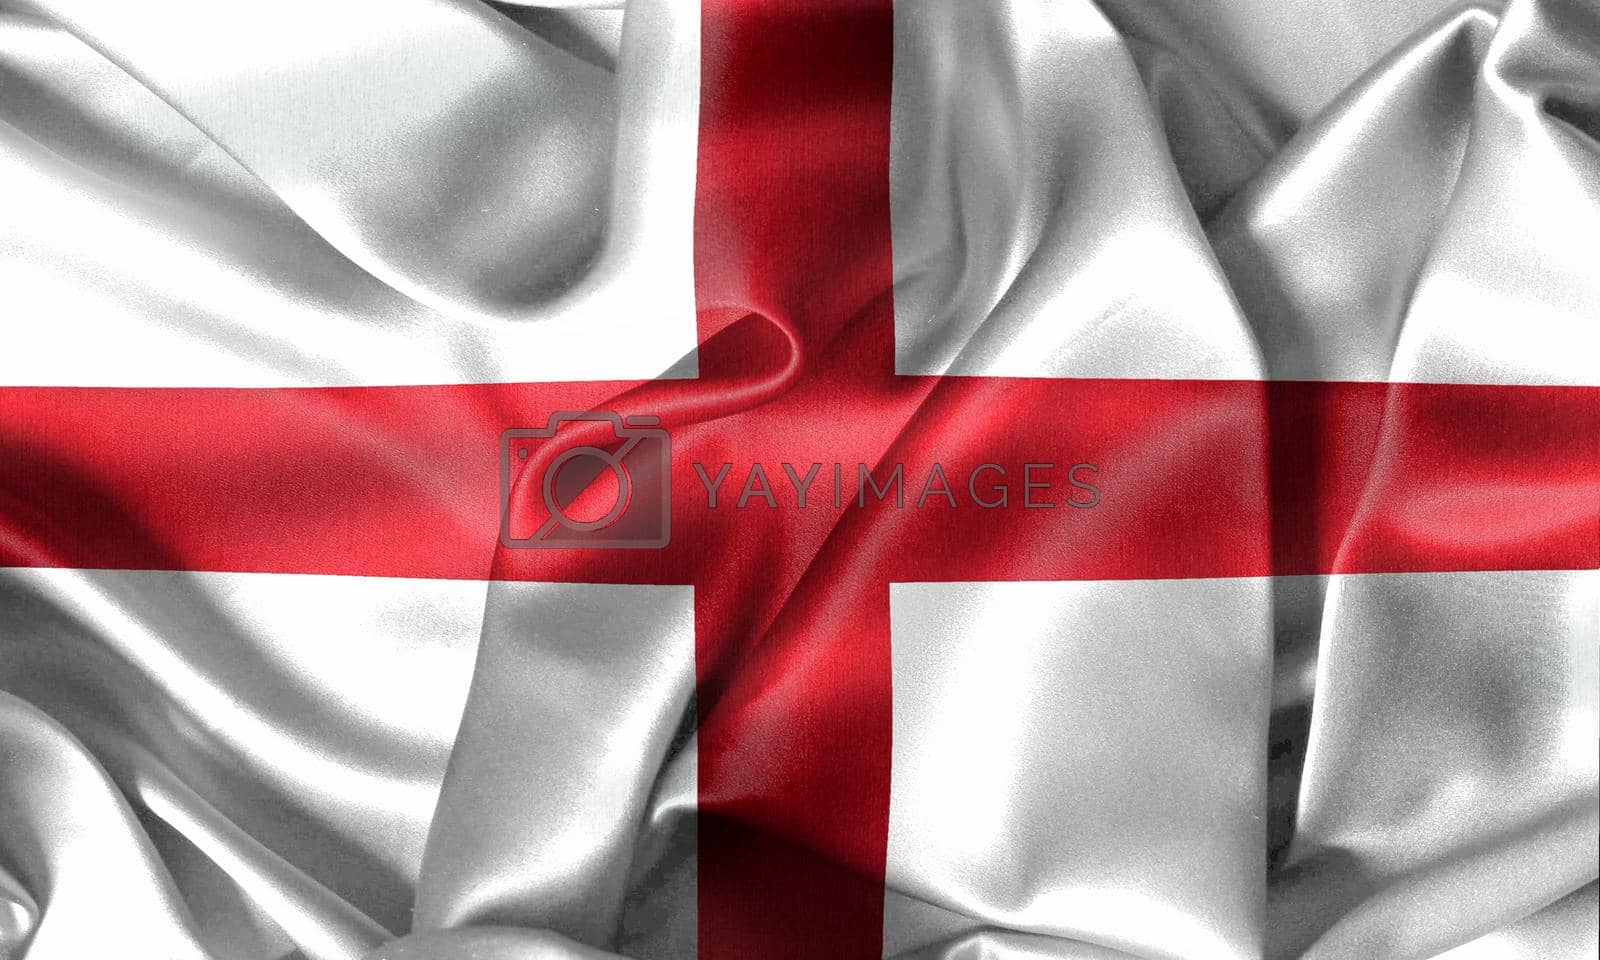 Royalty free image of England flag - realistic waving fabric flag by MP_foto71